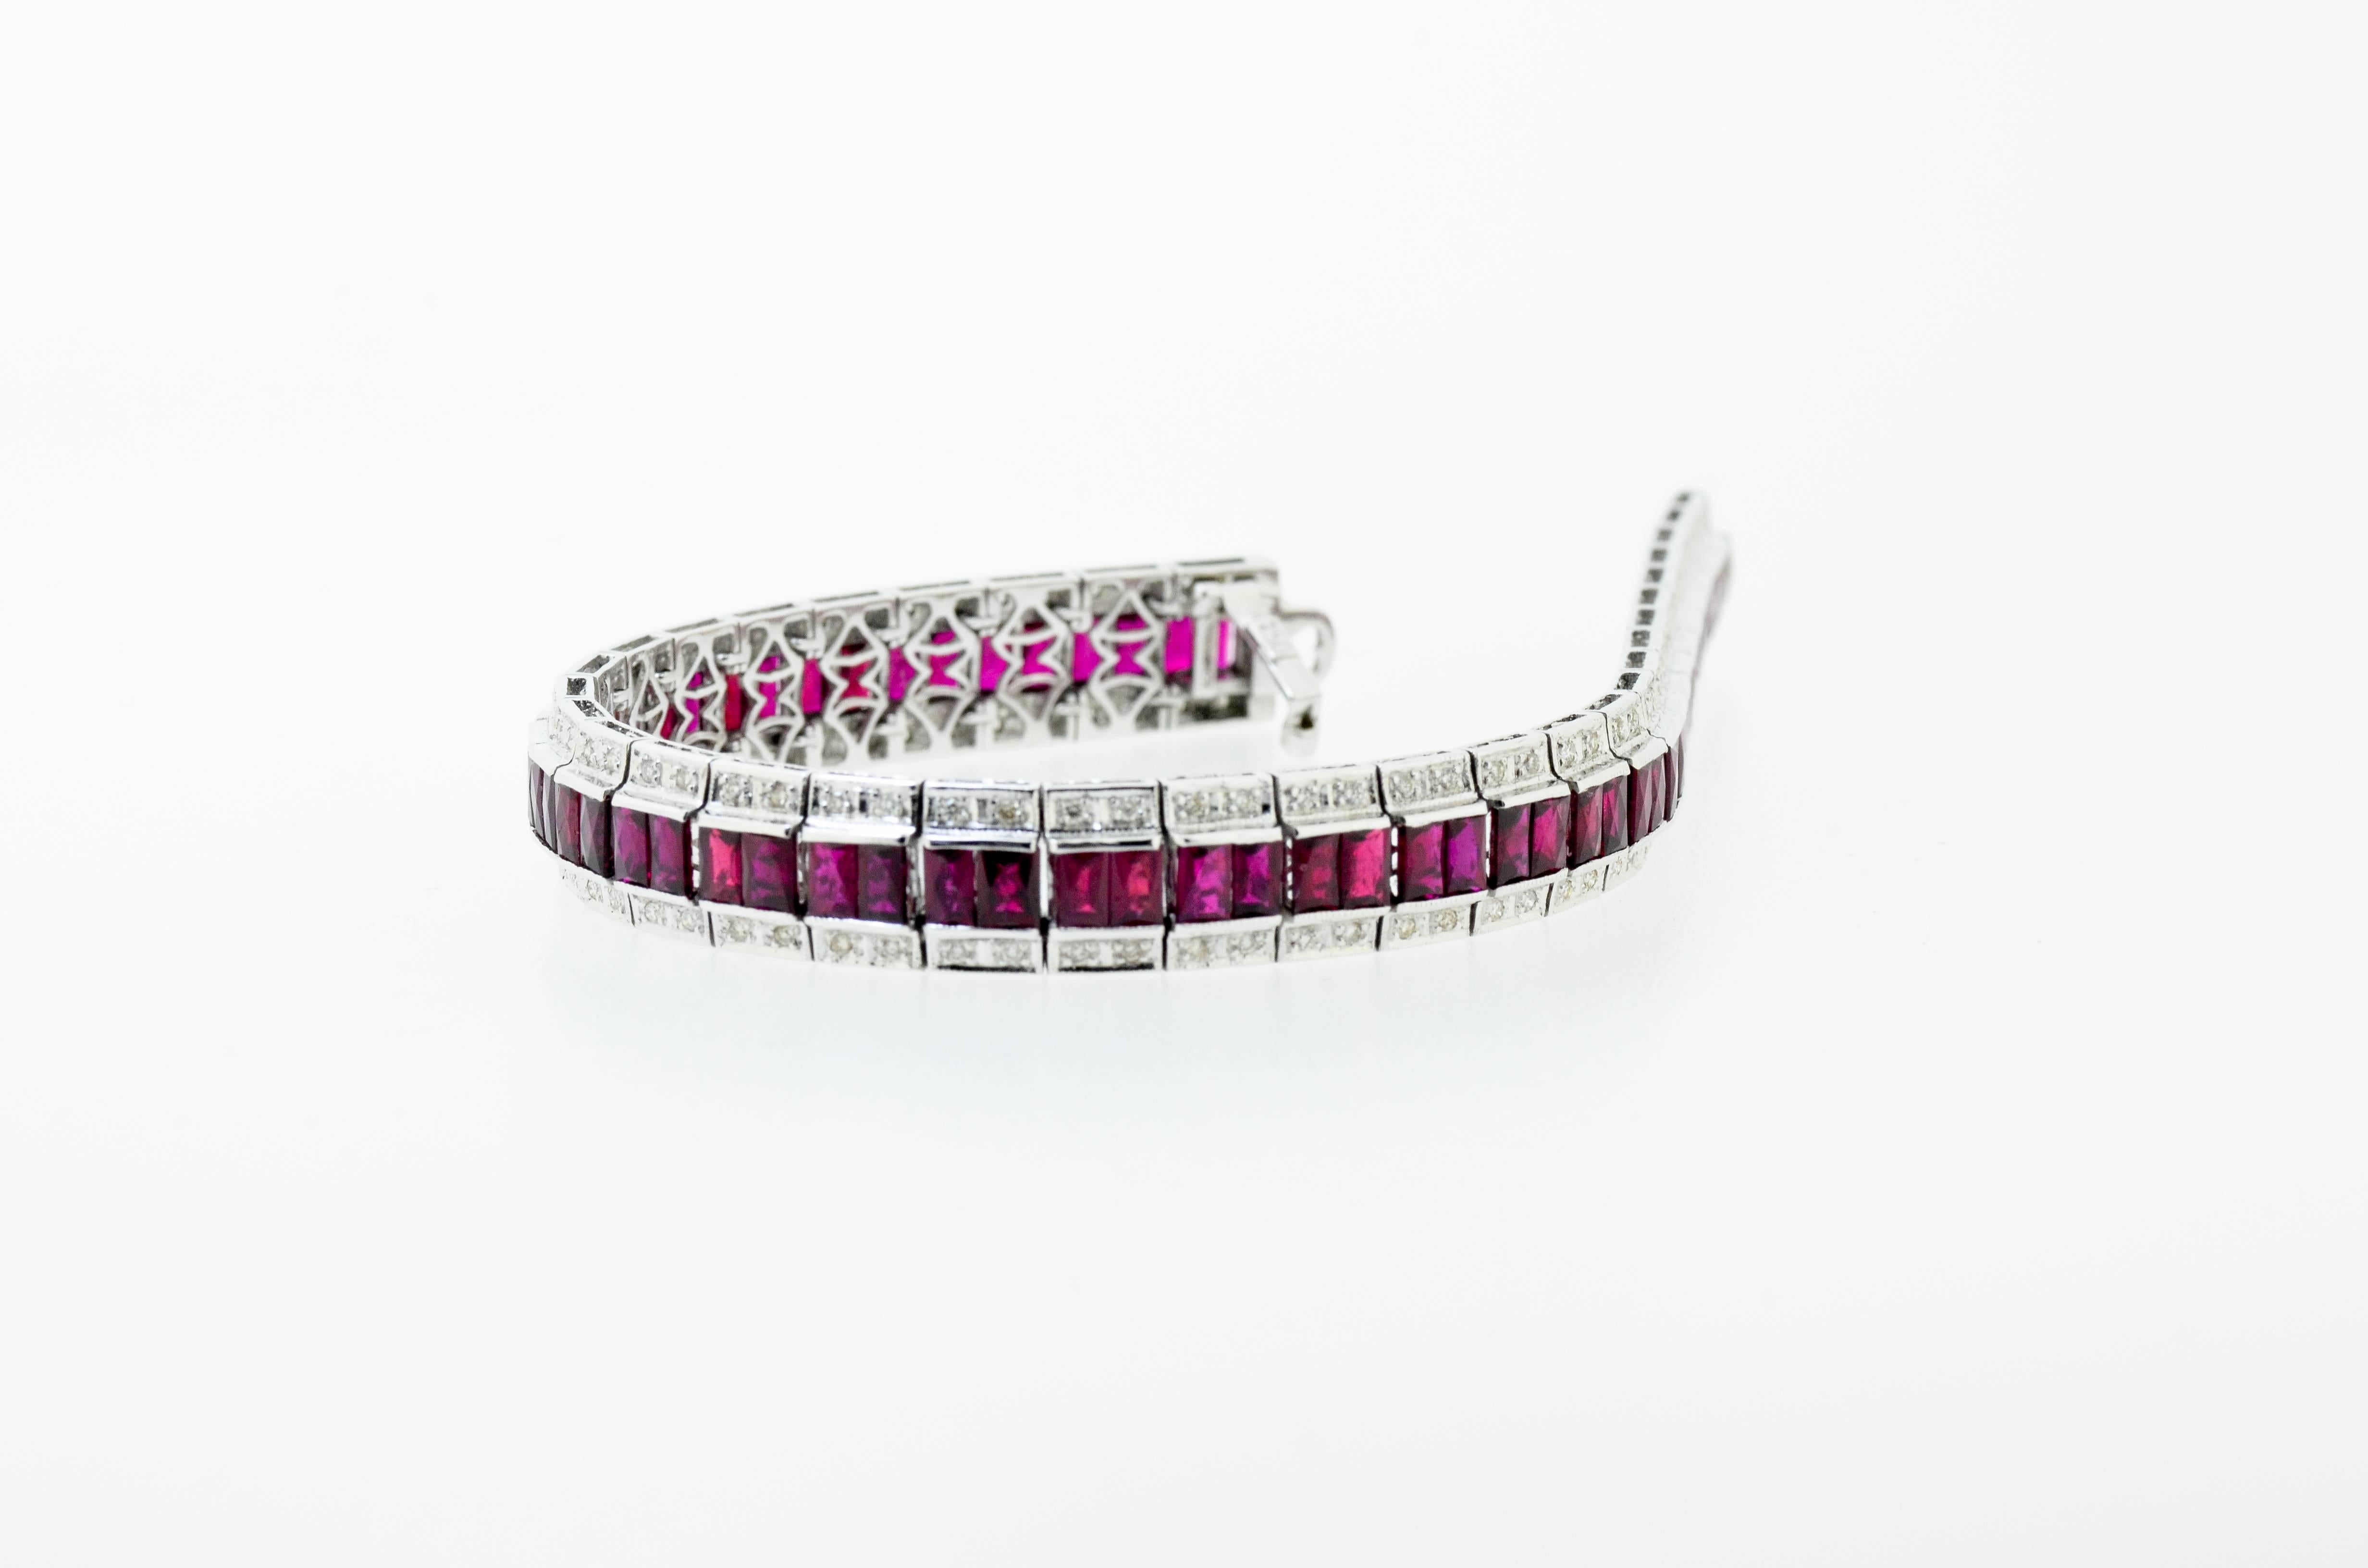 Stunning ruby and diamond bracelet set with over 10 carats of baguette cut ruby and 0.830 carat of clean white brilliant cut diamonds set in 18 karat white gold.
